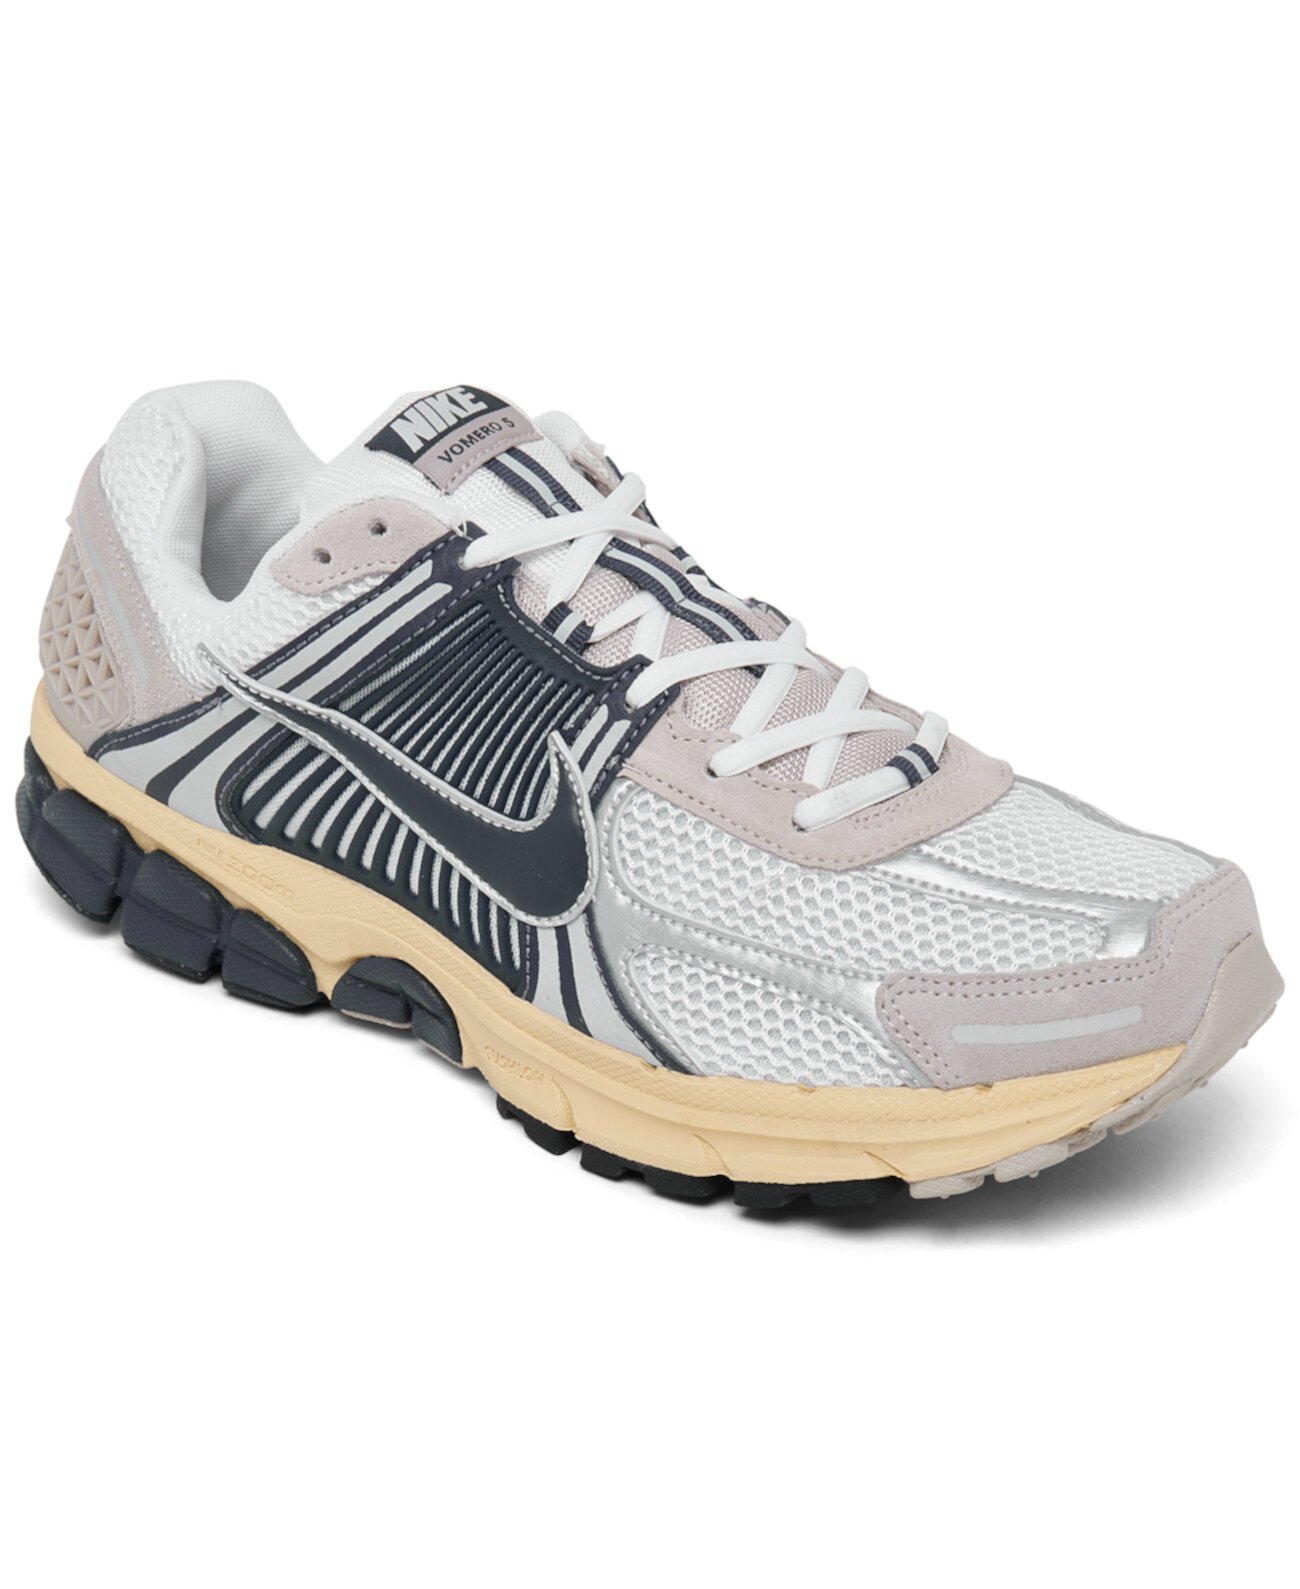 Men’s Casual Sneakers from Finish Line Nike